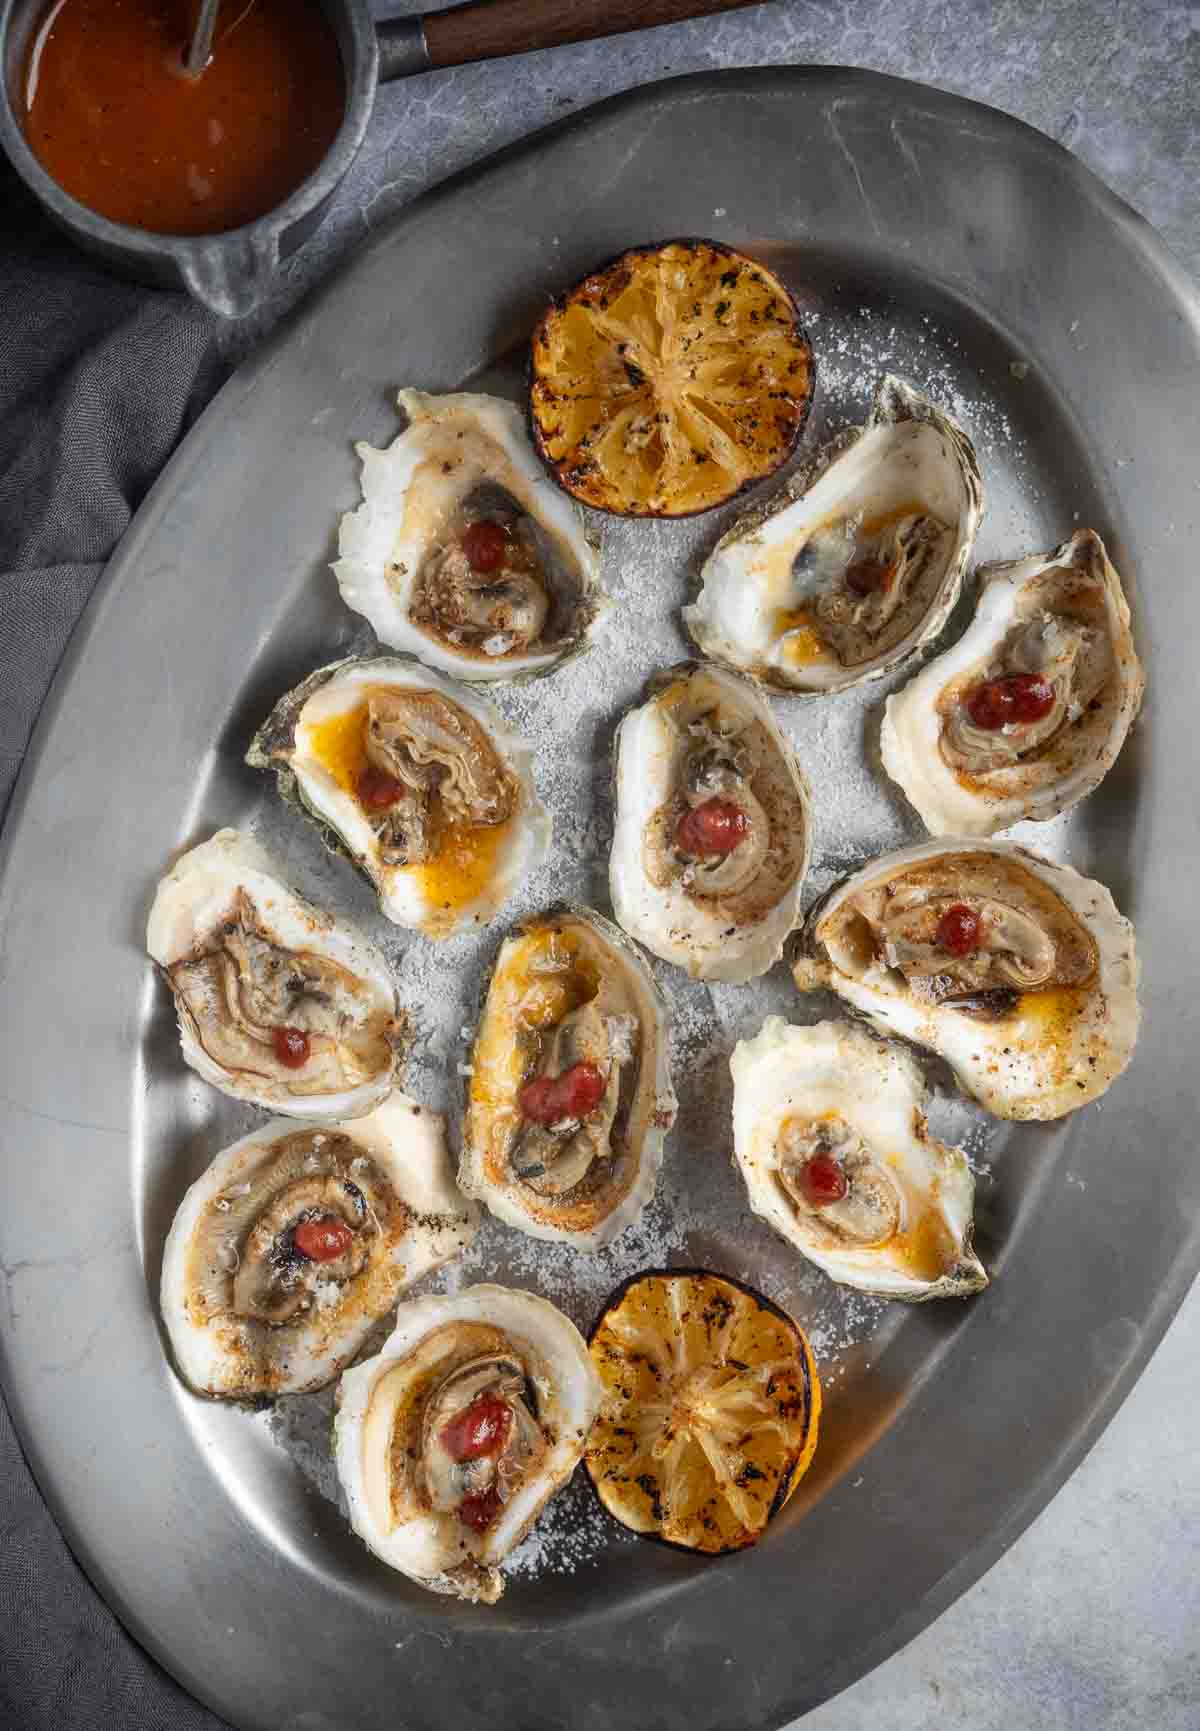 BBQ Oysters in the half shell on a serving platter. The kosher salt is laid out to hold the oysters in place.